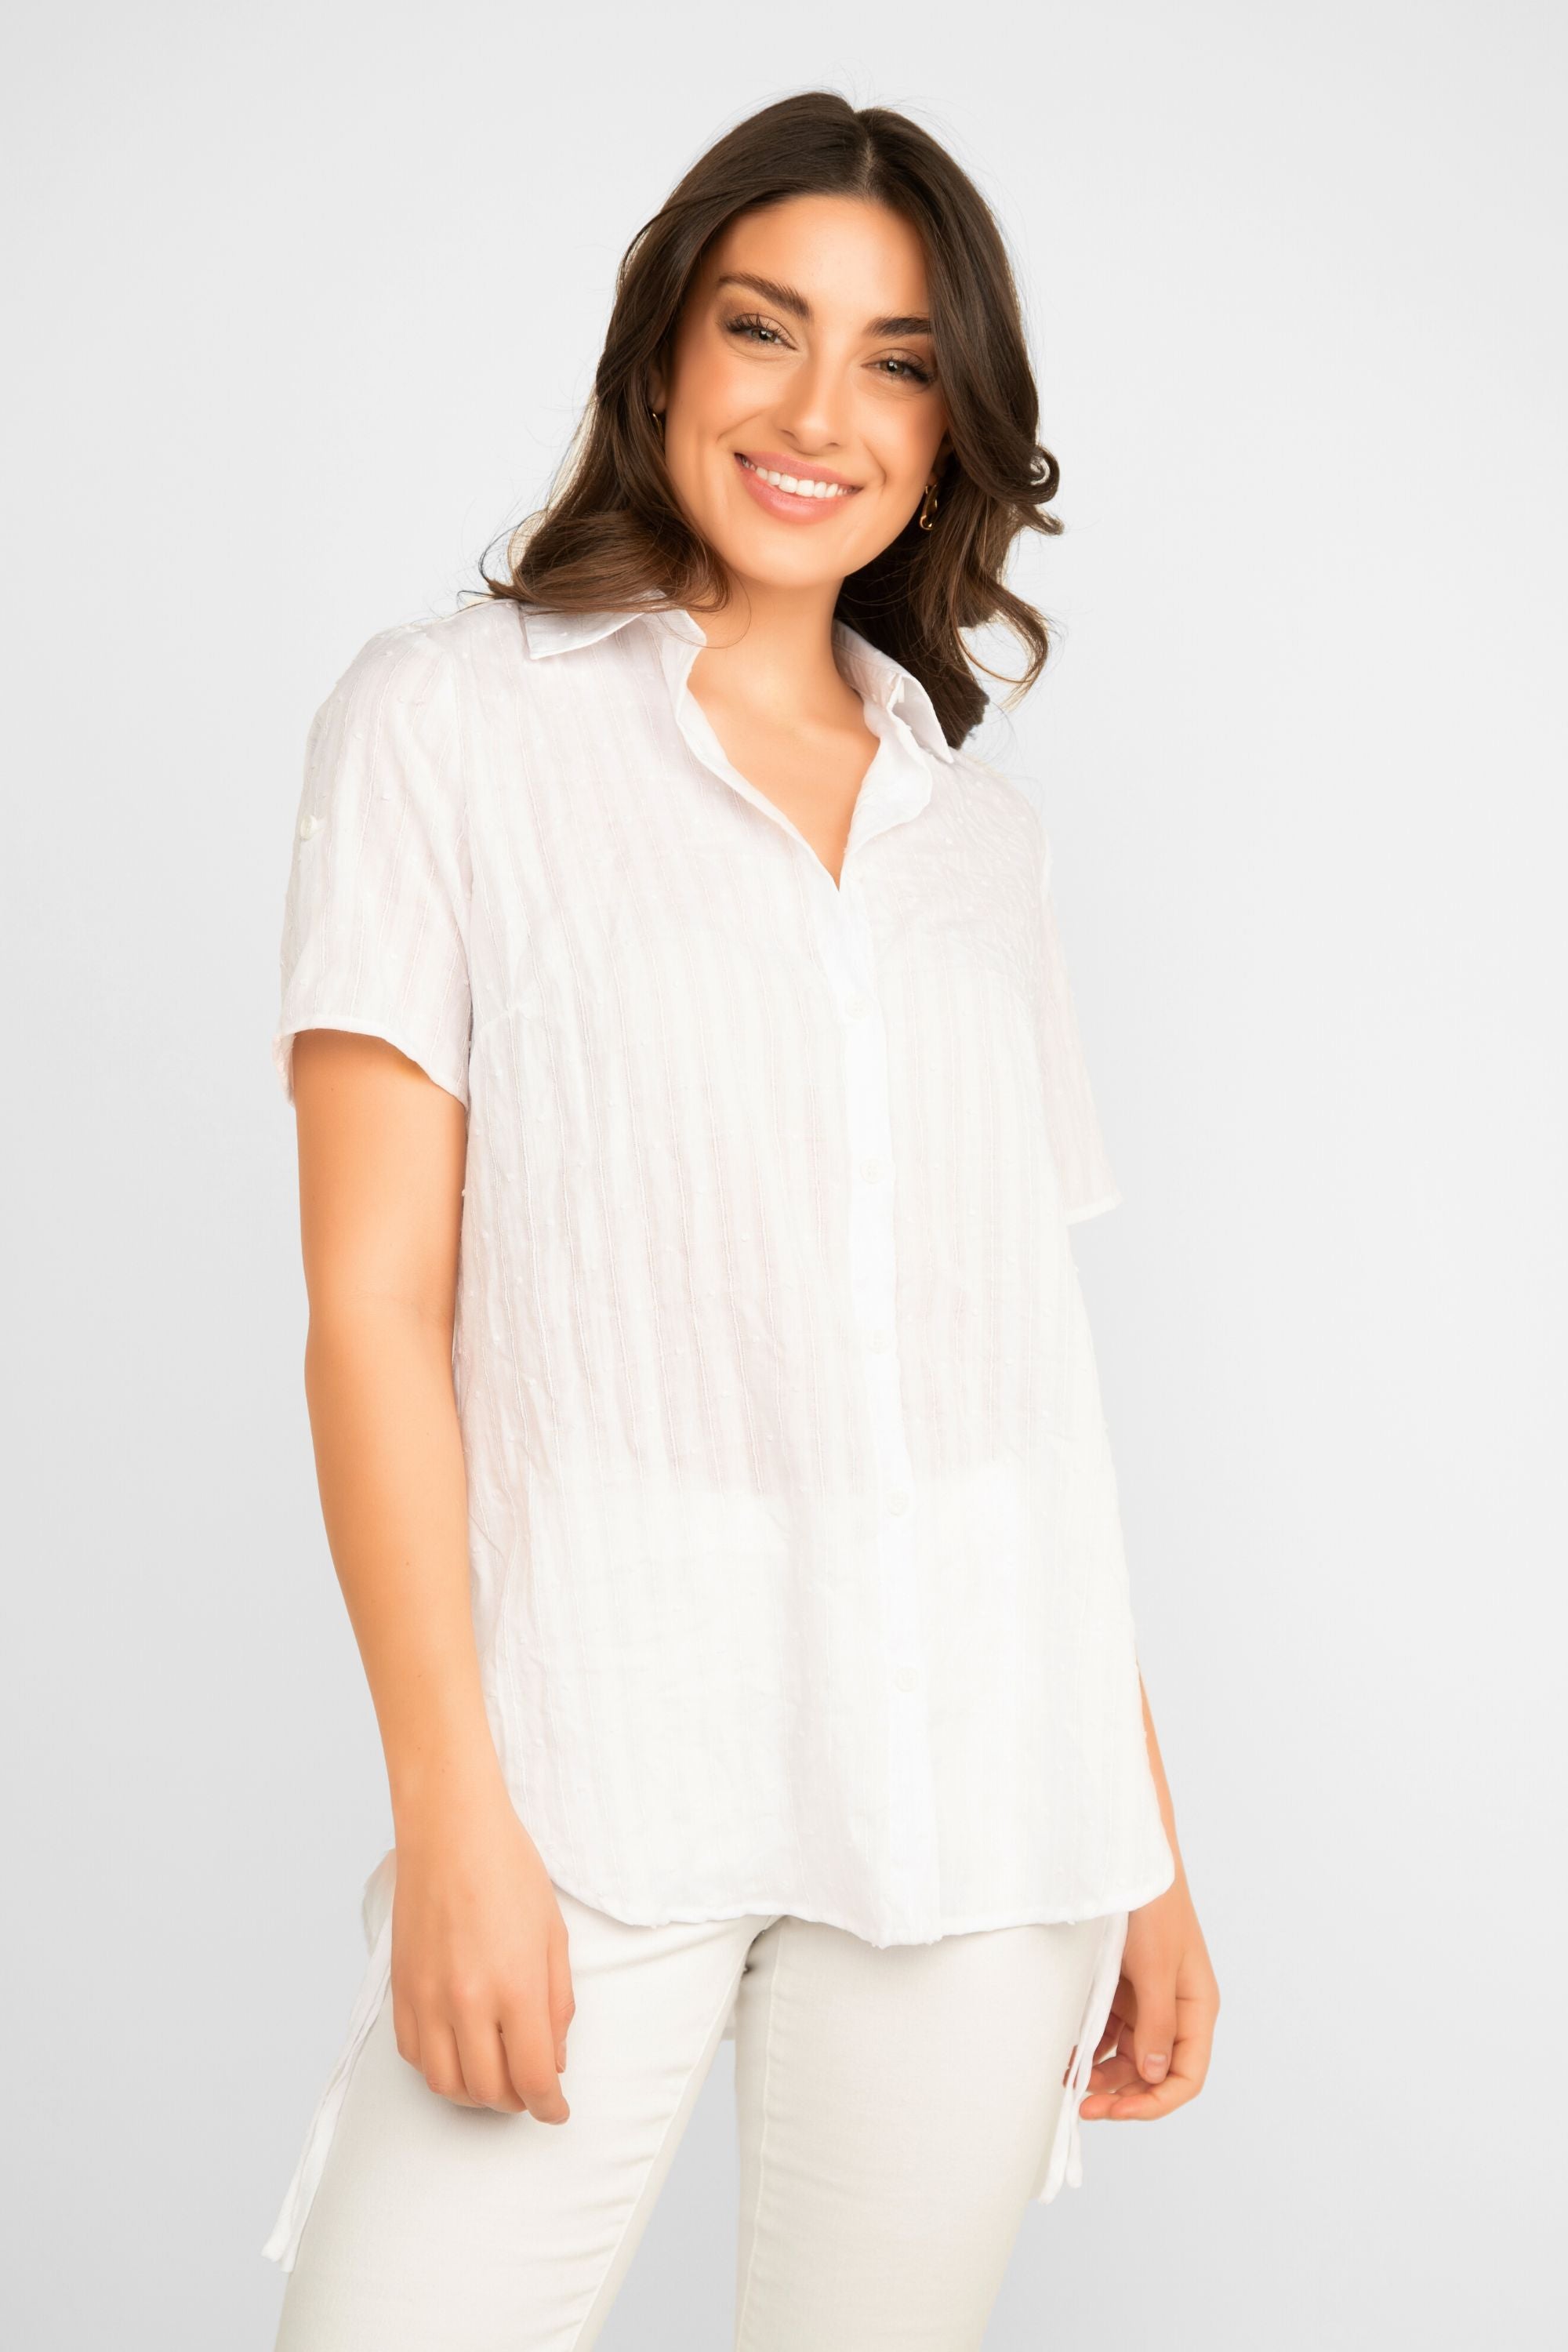 Women's Clothing ALISON SHERI (A41018) Short Sleeve Button Front Shirt in WHITE